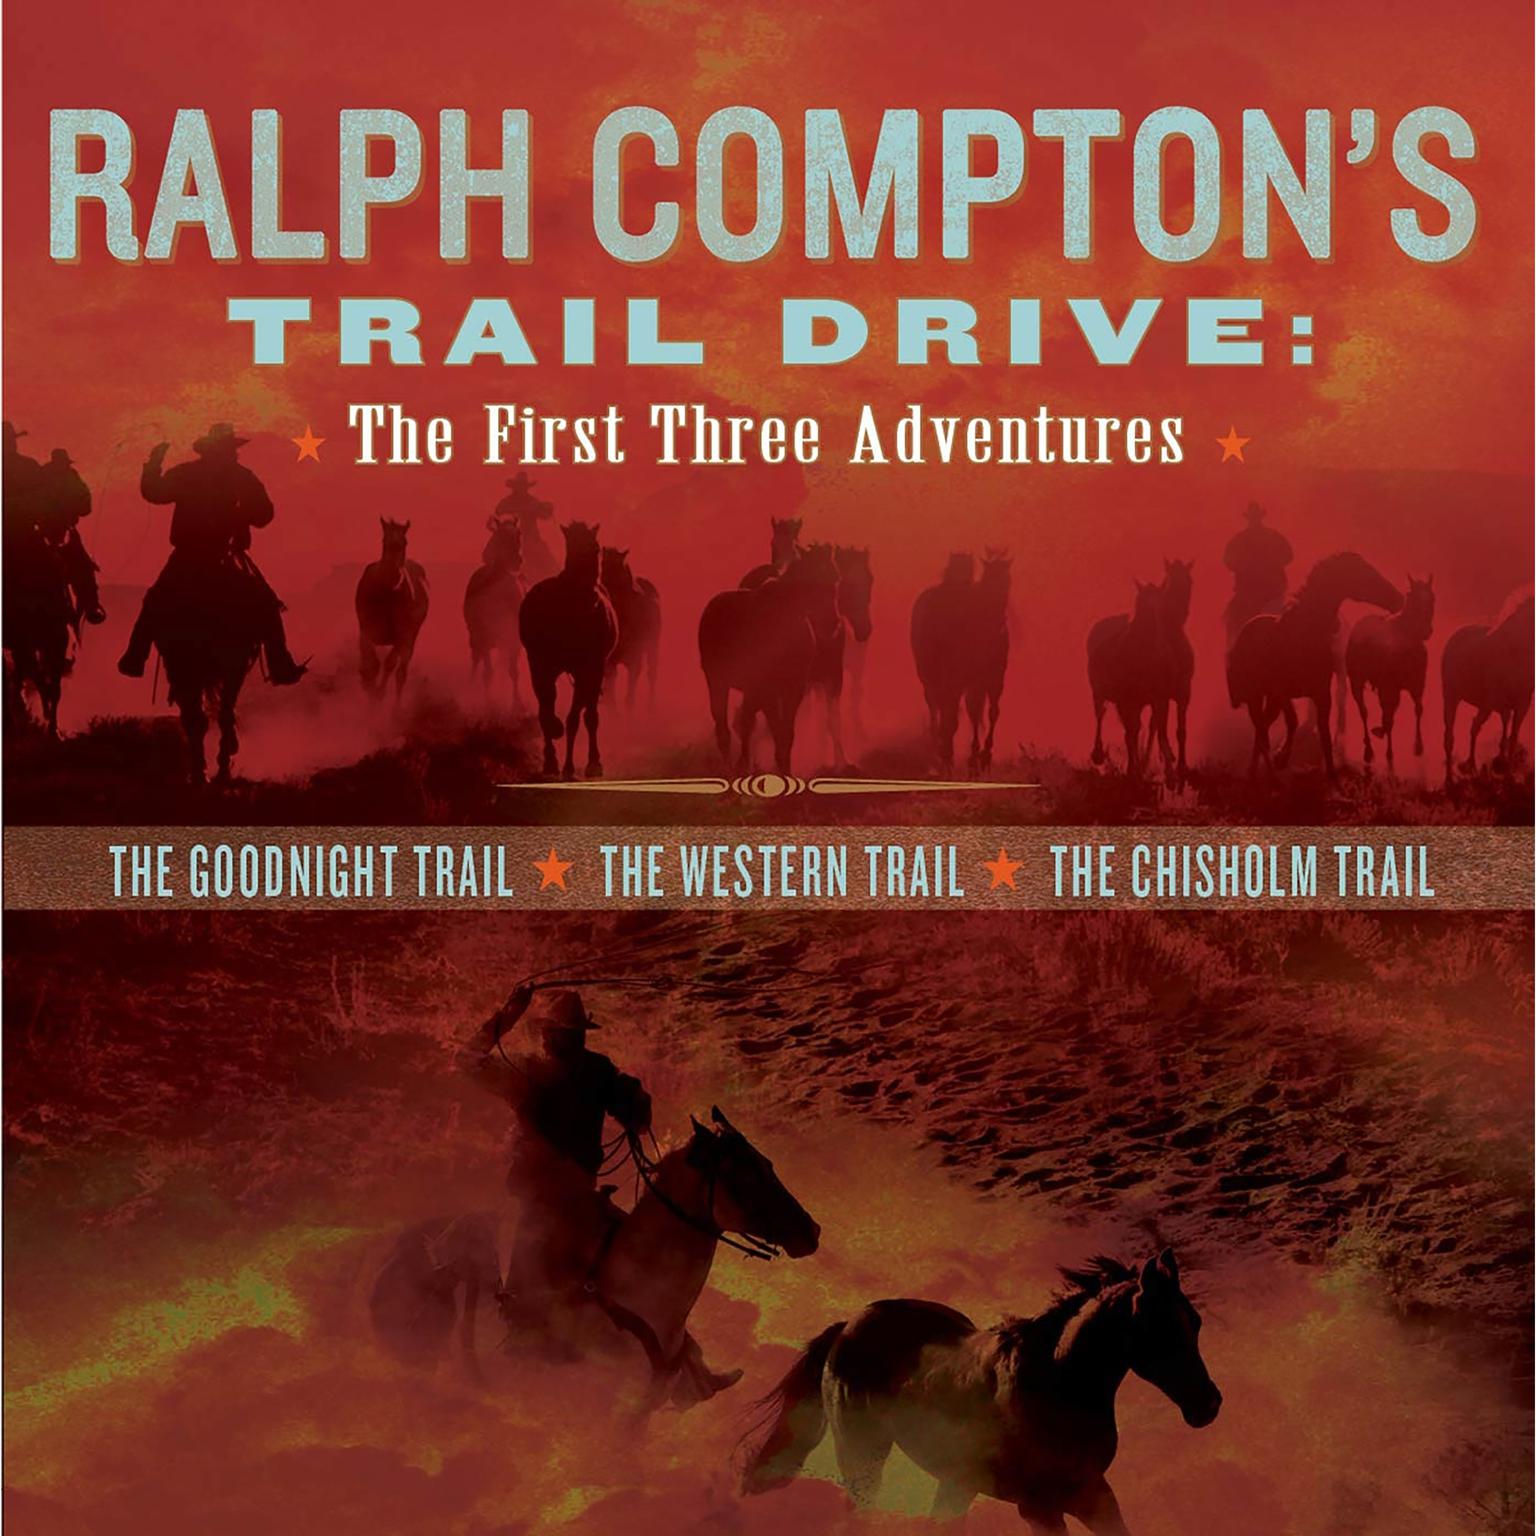 Ralph Comptons Trail Drive: The First Three Adventures (Abridged) Audiobook, by Ralph Compton